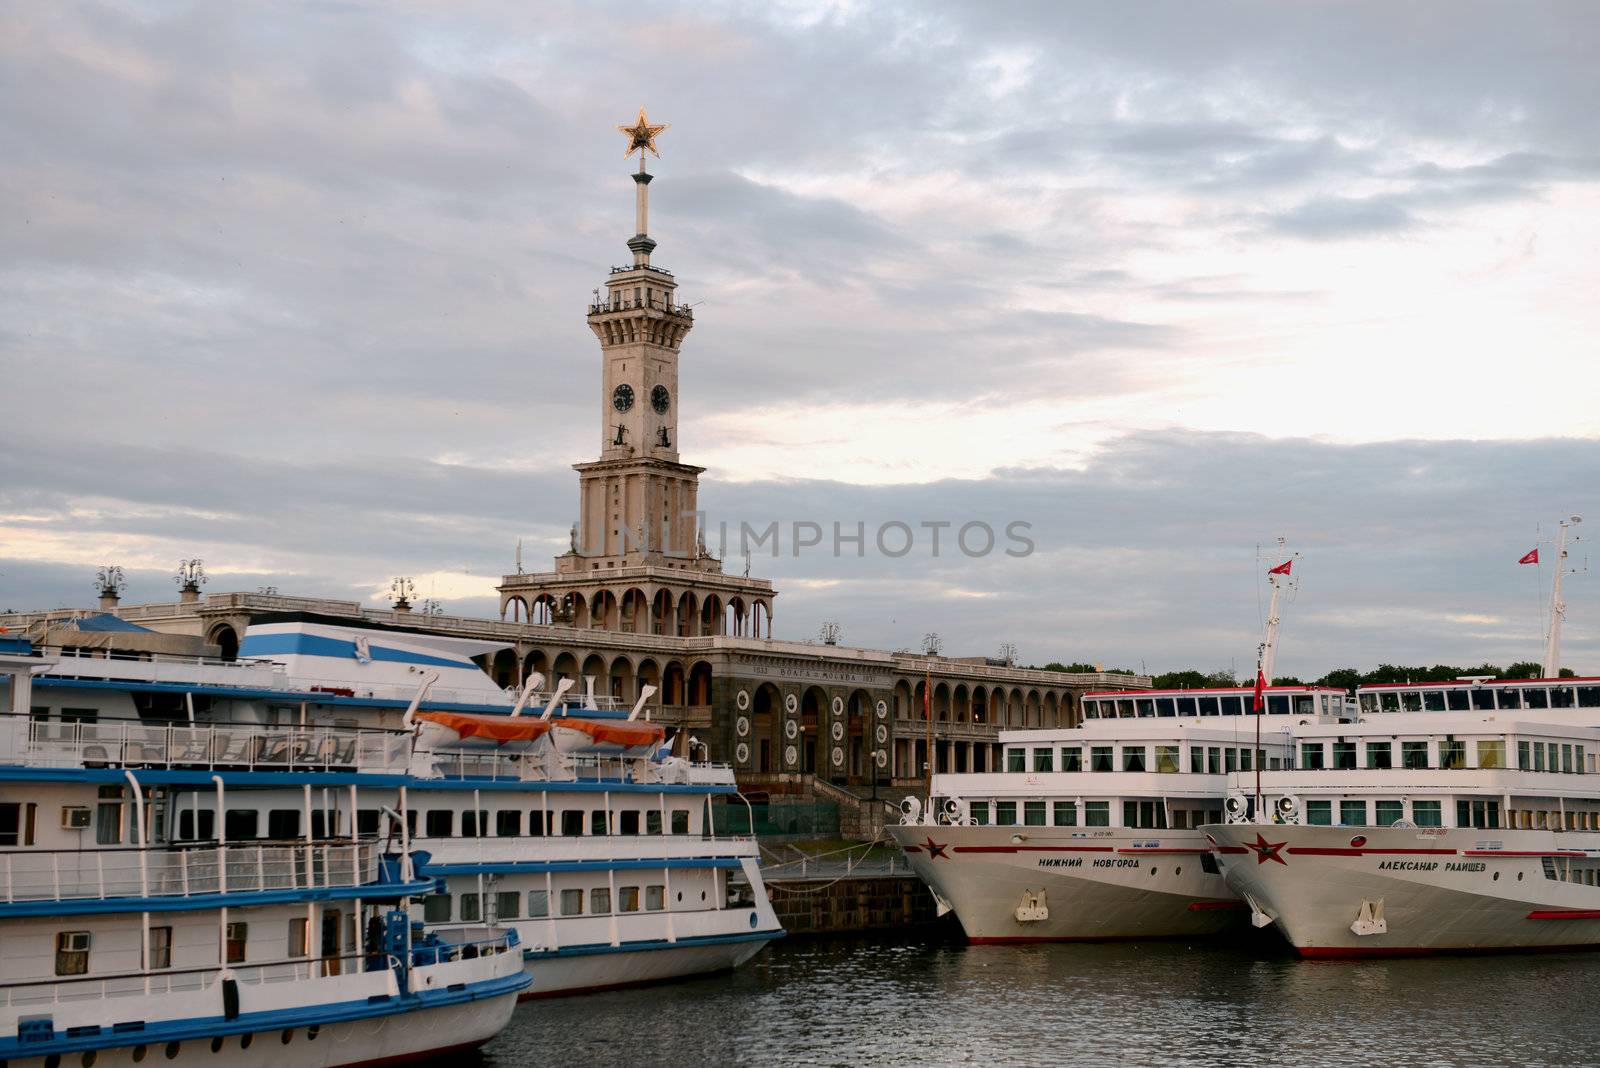 The cruise ships in Moscow river passanger port. Taken on Joly 2012.